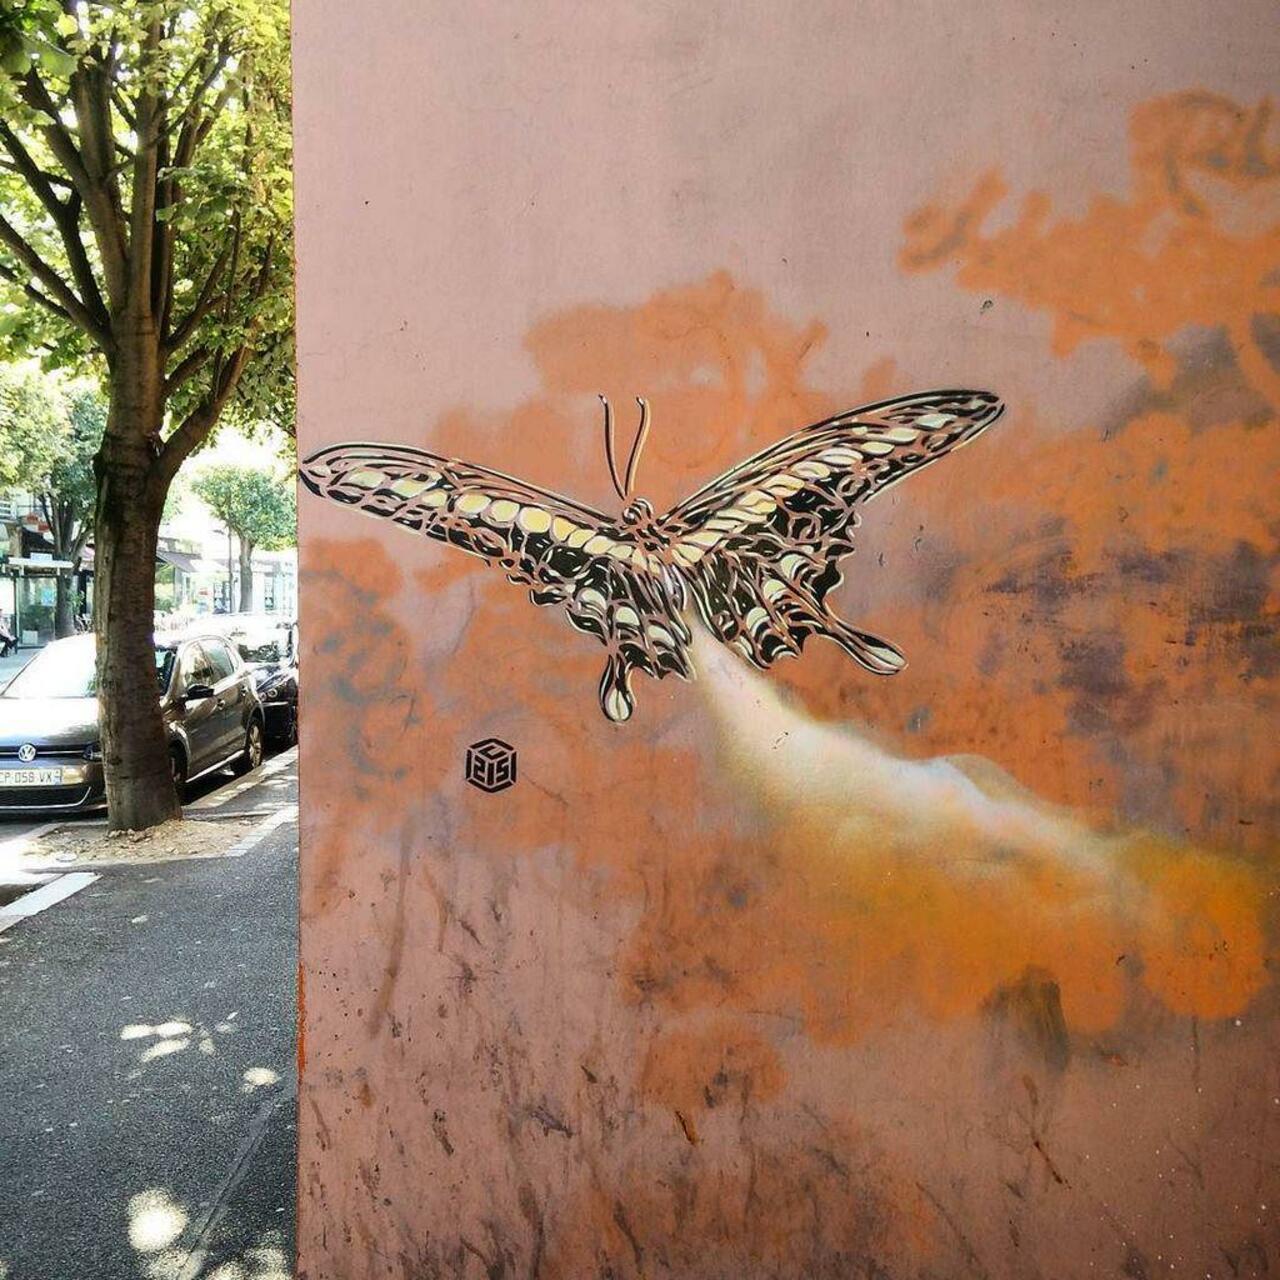 Butterfly by #C215 @christianguemy 
#streetart #streetartparis #parisstreetart #parisgraffiti #graffiti #graffitiar… http://t.co/stmxd1PnCq